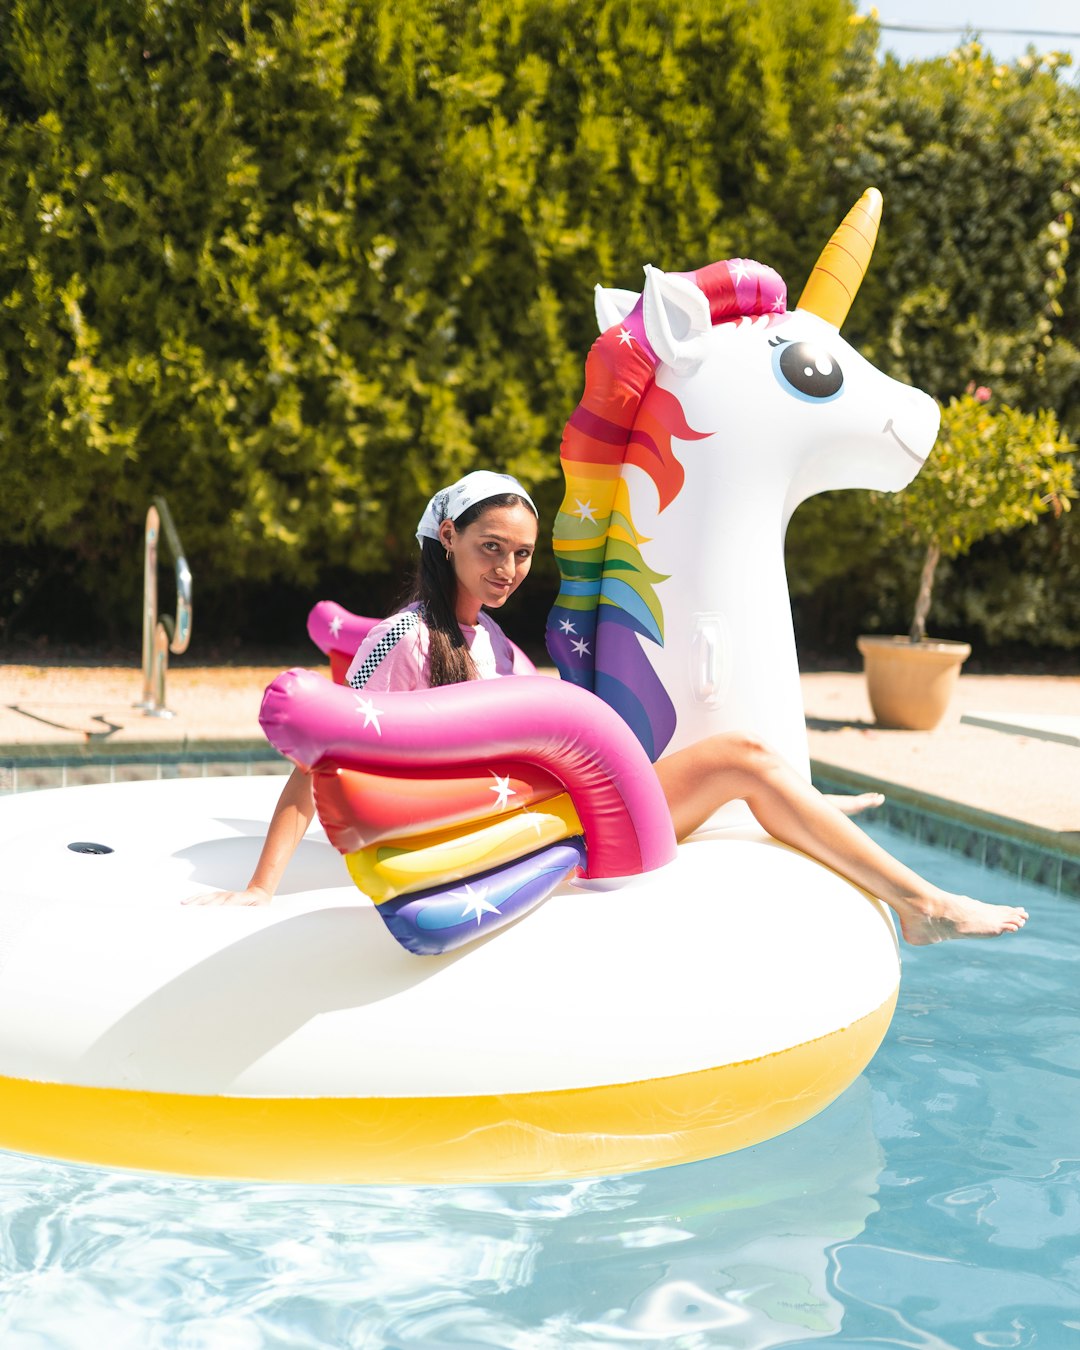 girl in pink and white polka dot dress riding white and pink inflatable duck